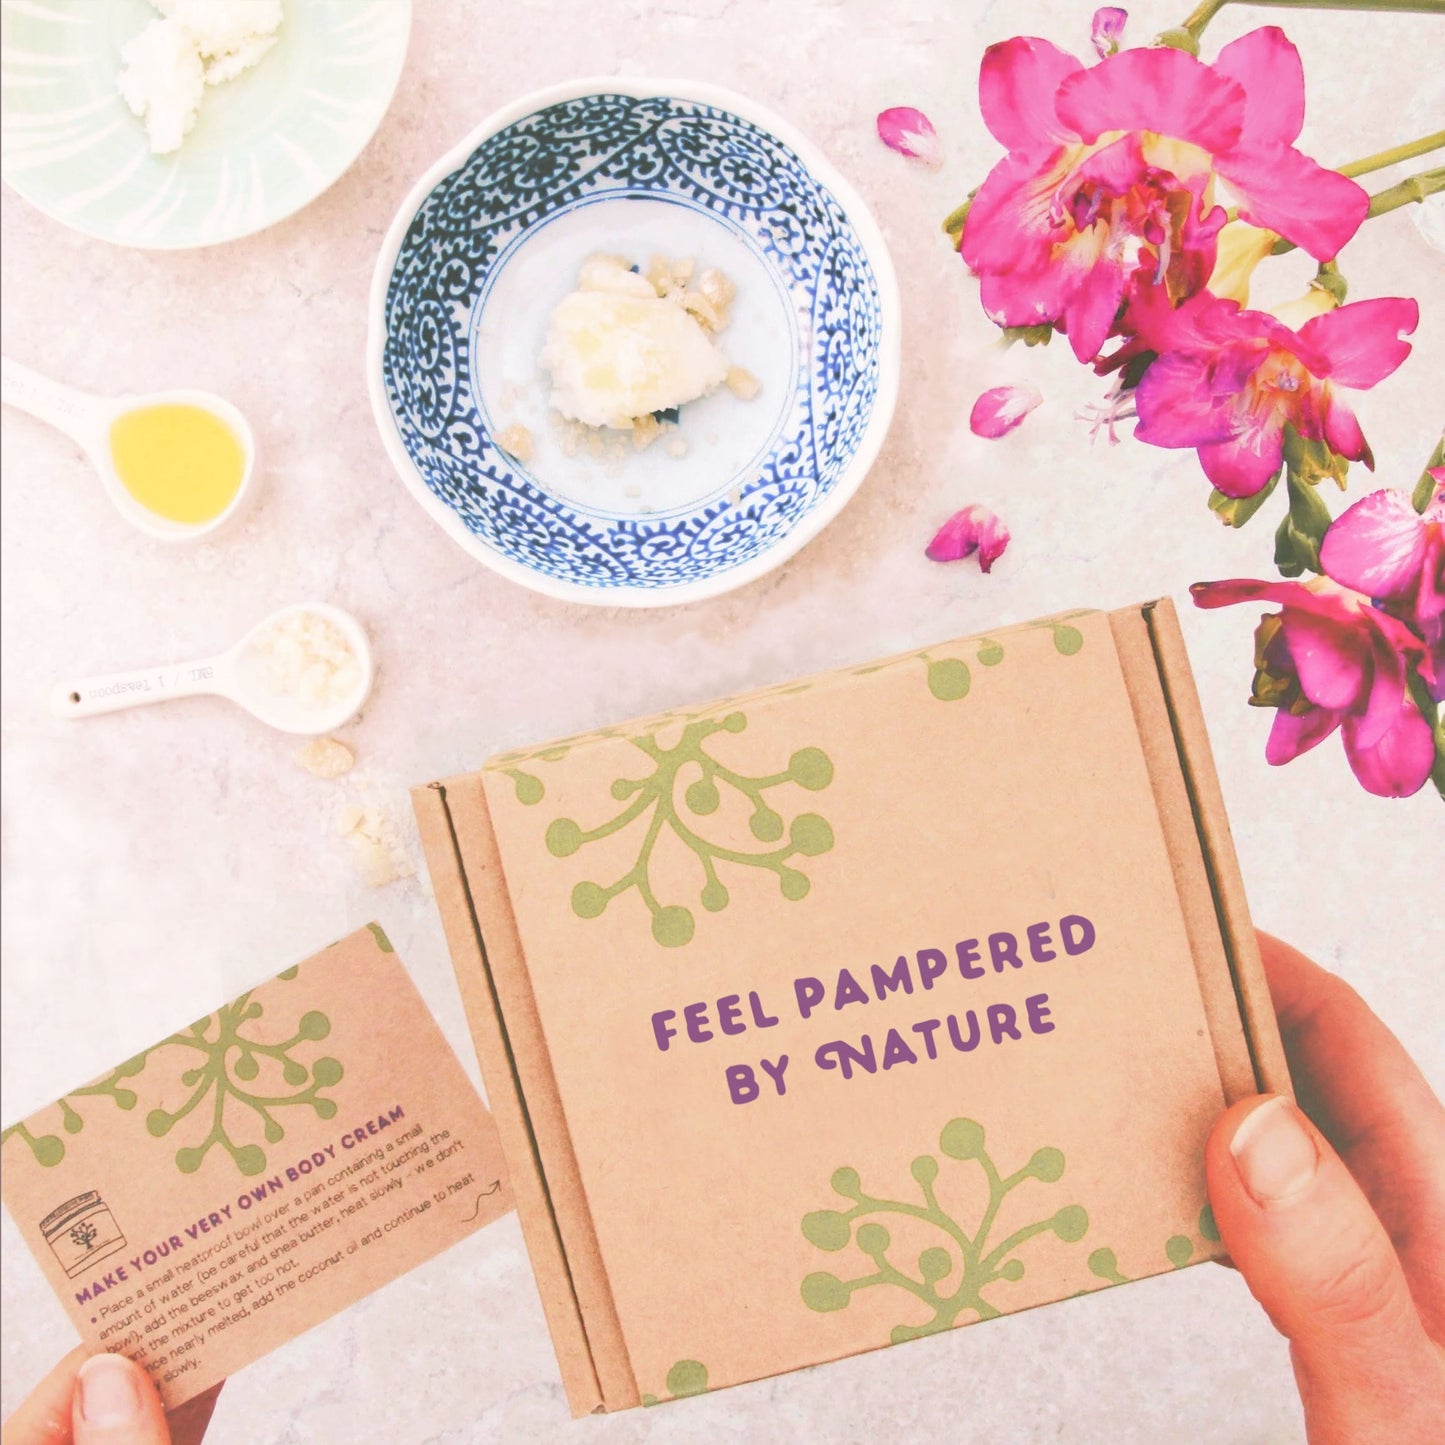 make your own moisturiser gift with gift message 'pampering by nature'